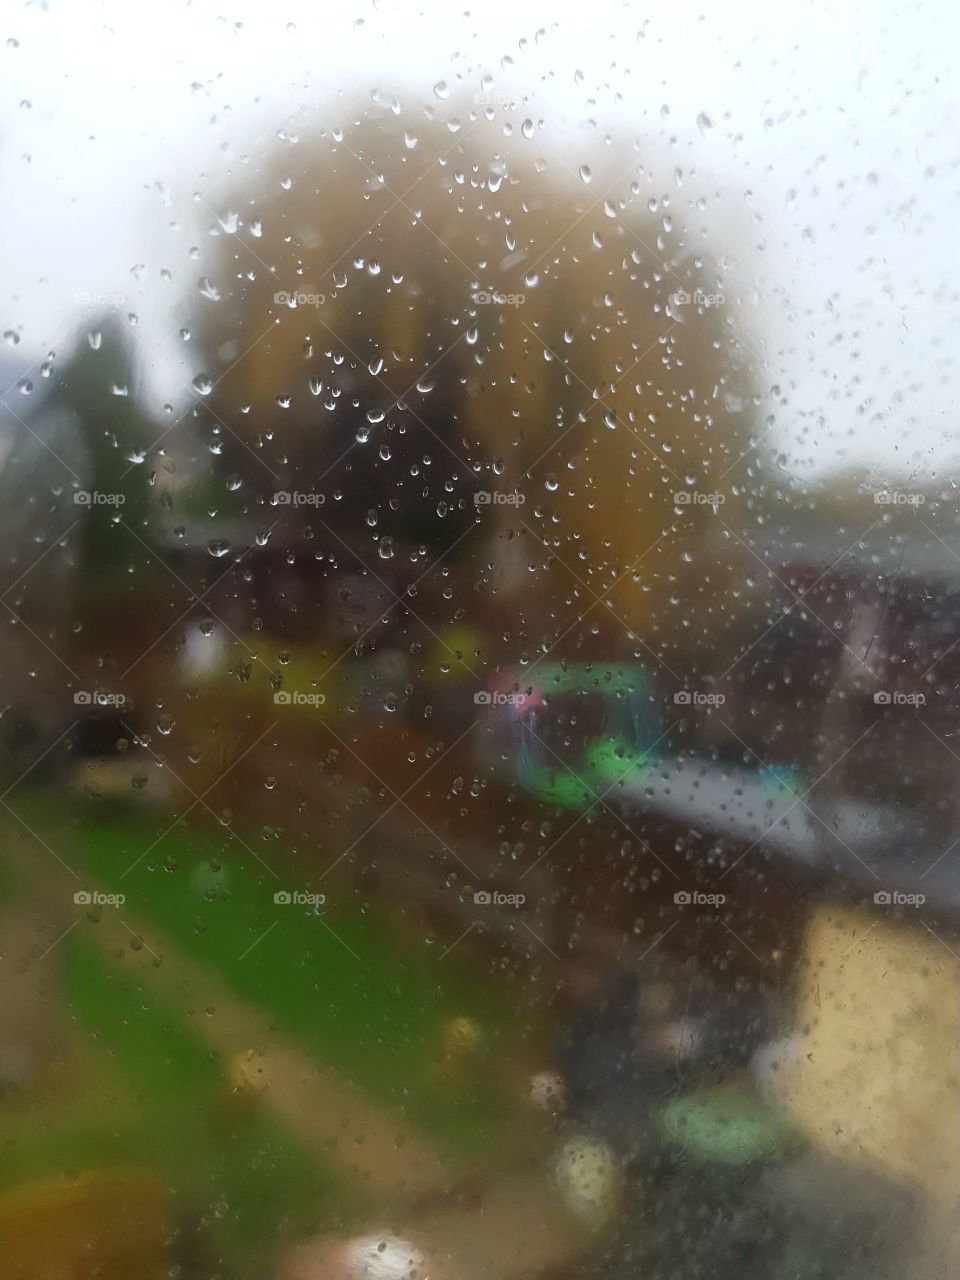 tiny water droplets on a window